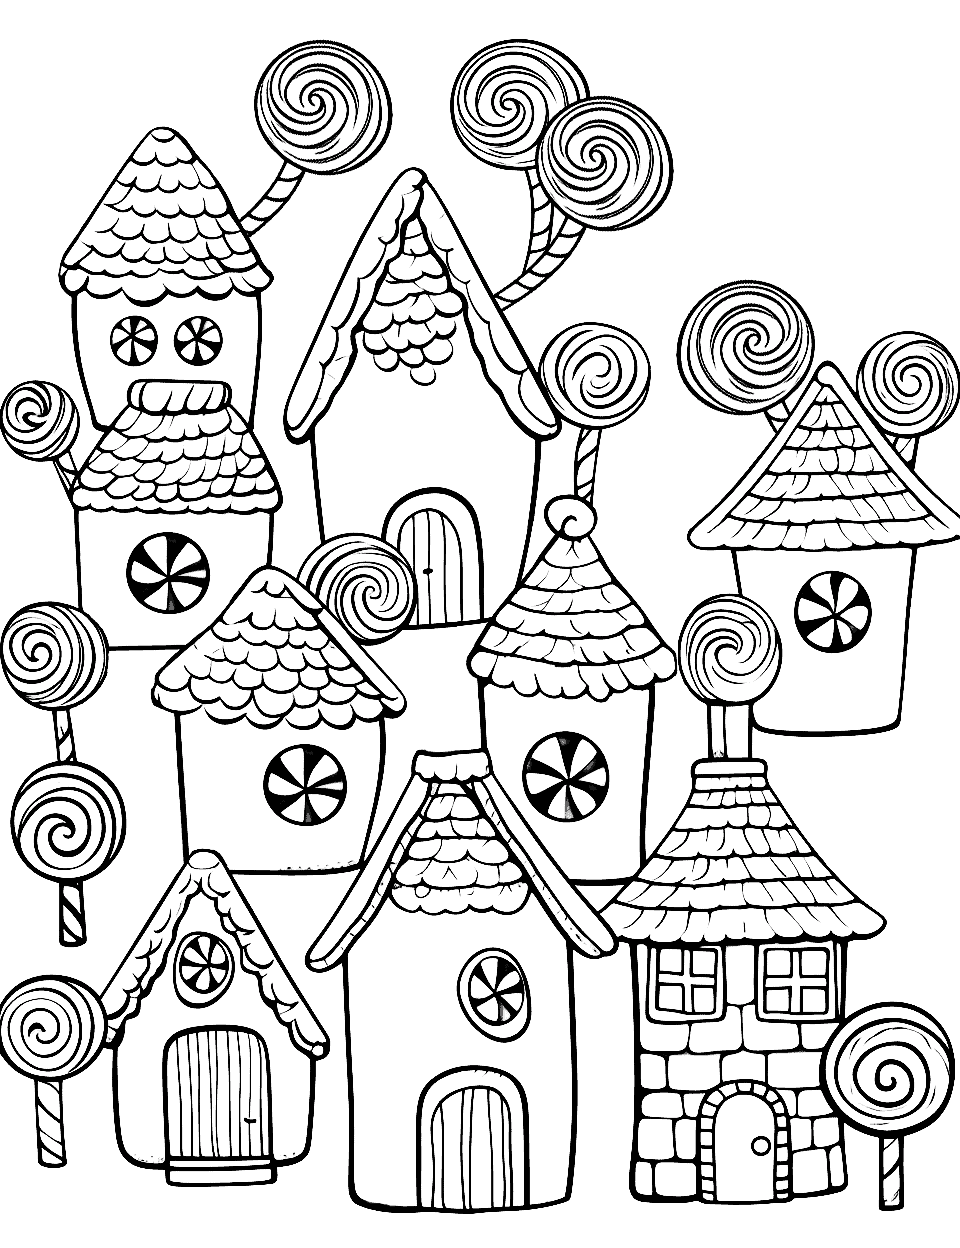 Gingerbread Village Festival Candy Coloring Page - A village where all the houses are made of gingerbread and decorated with candies.